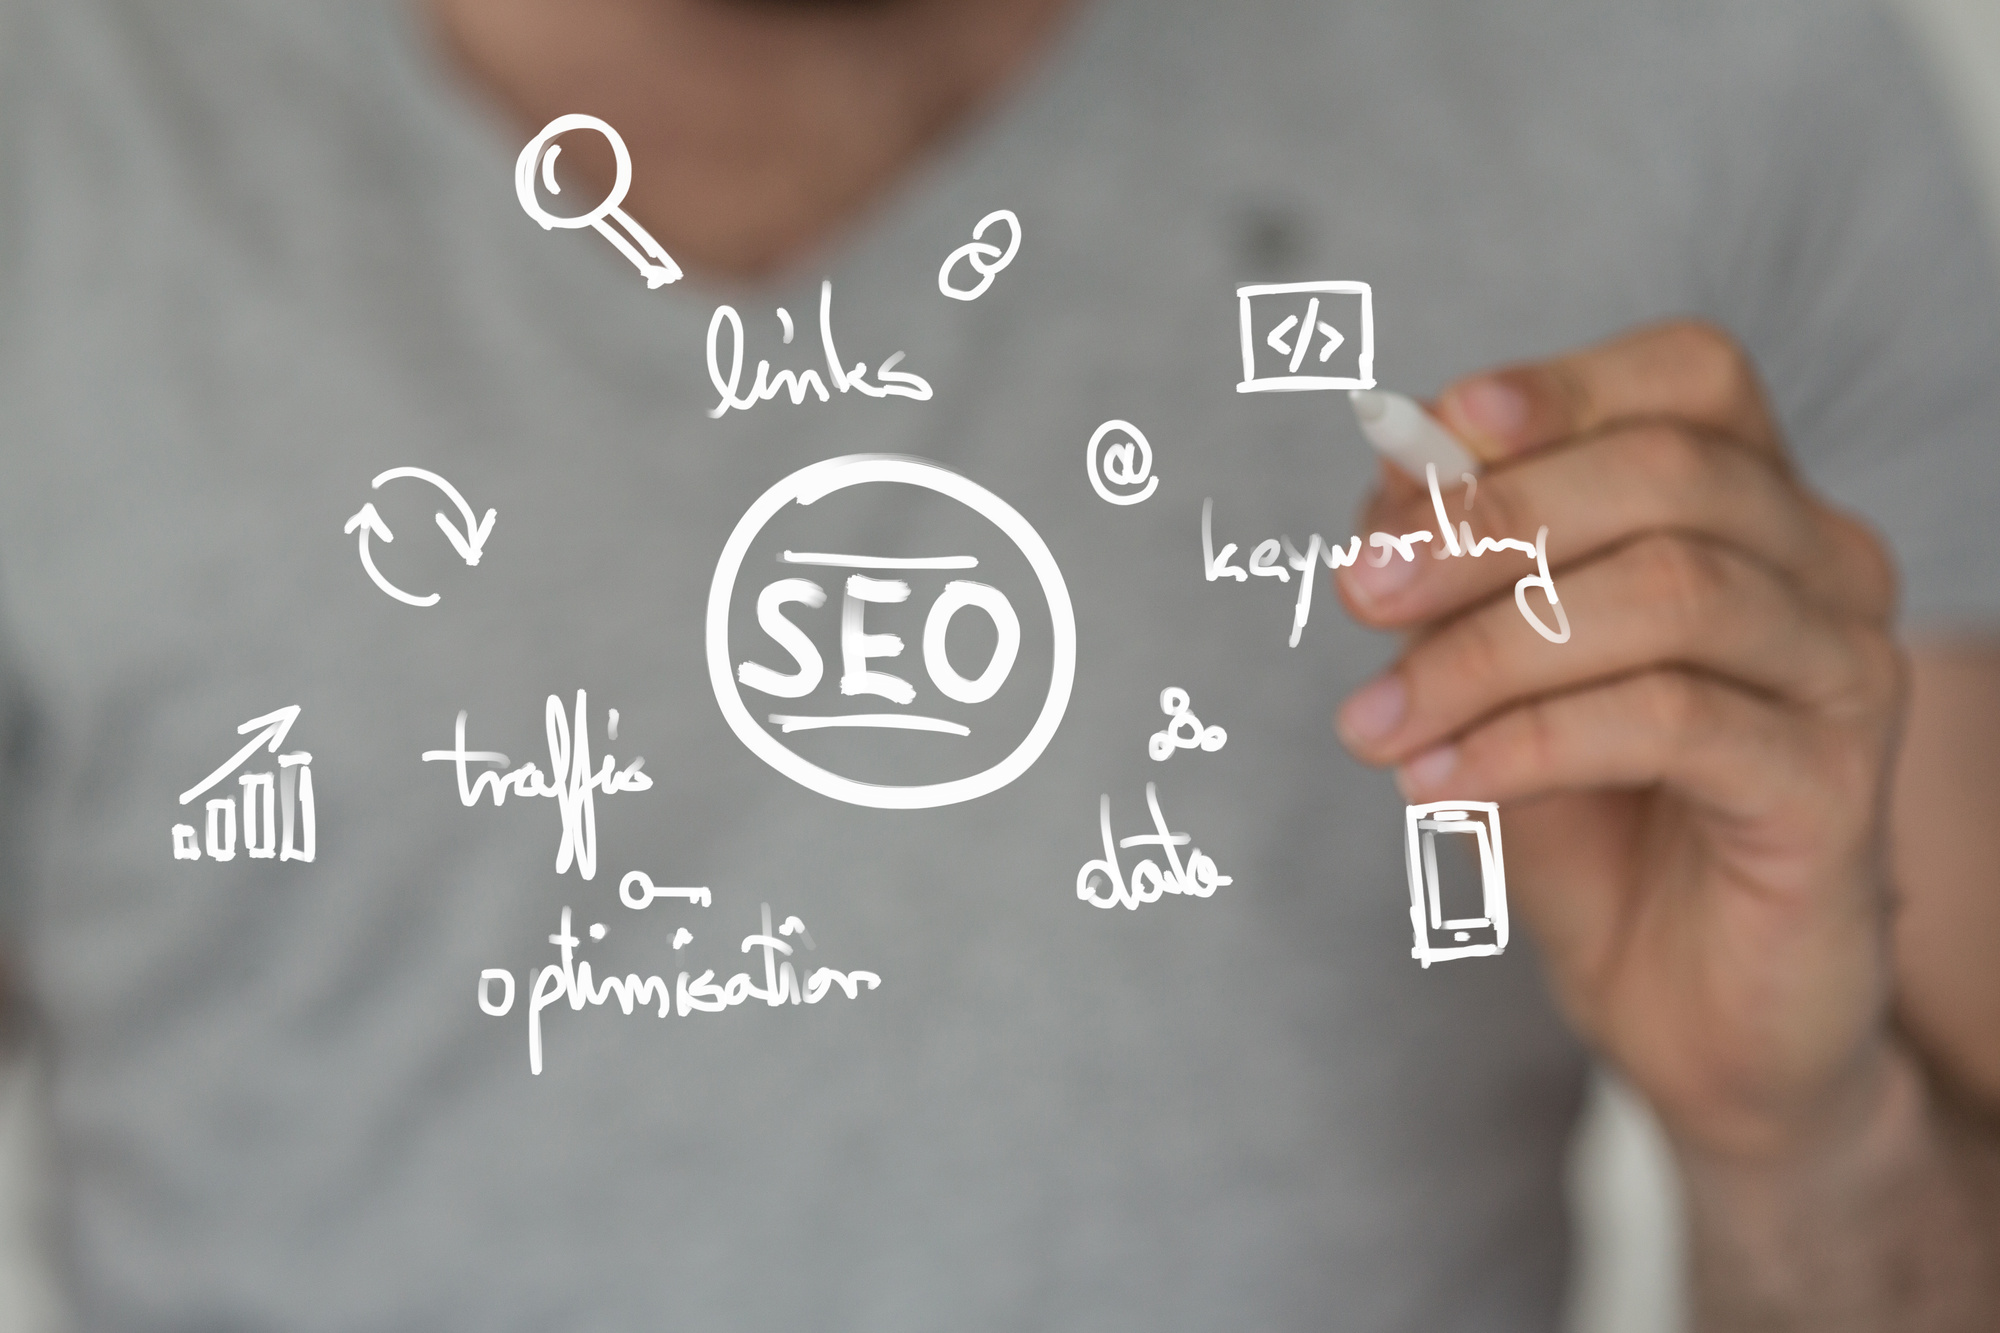 SEO and related terms and icons